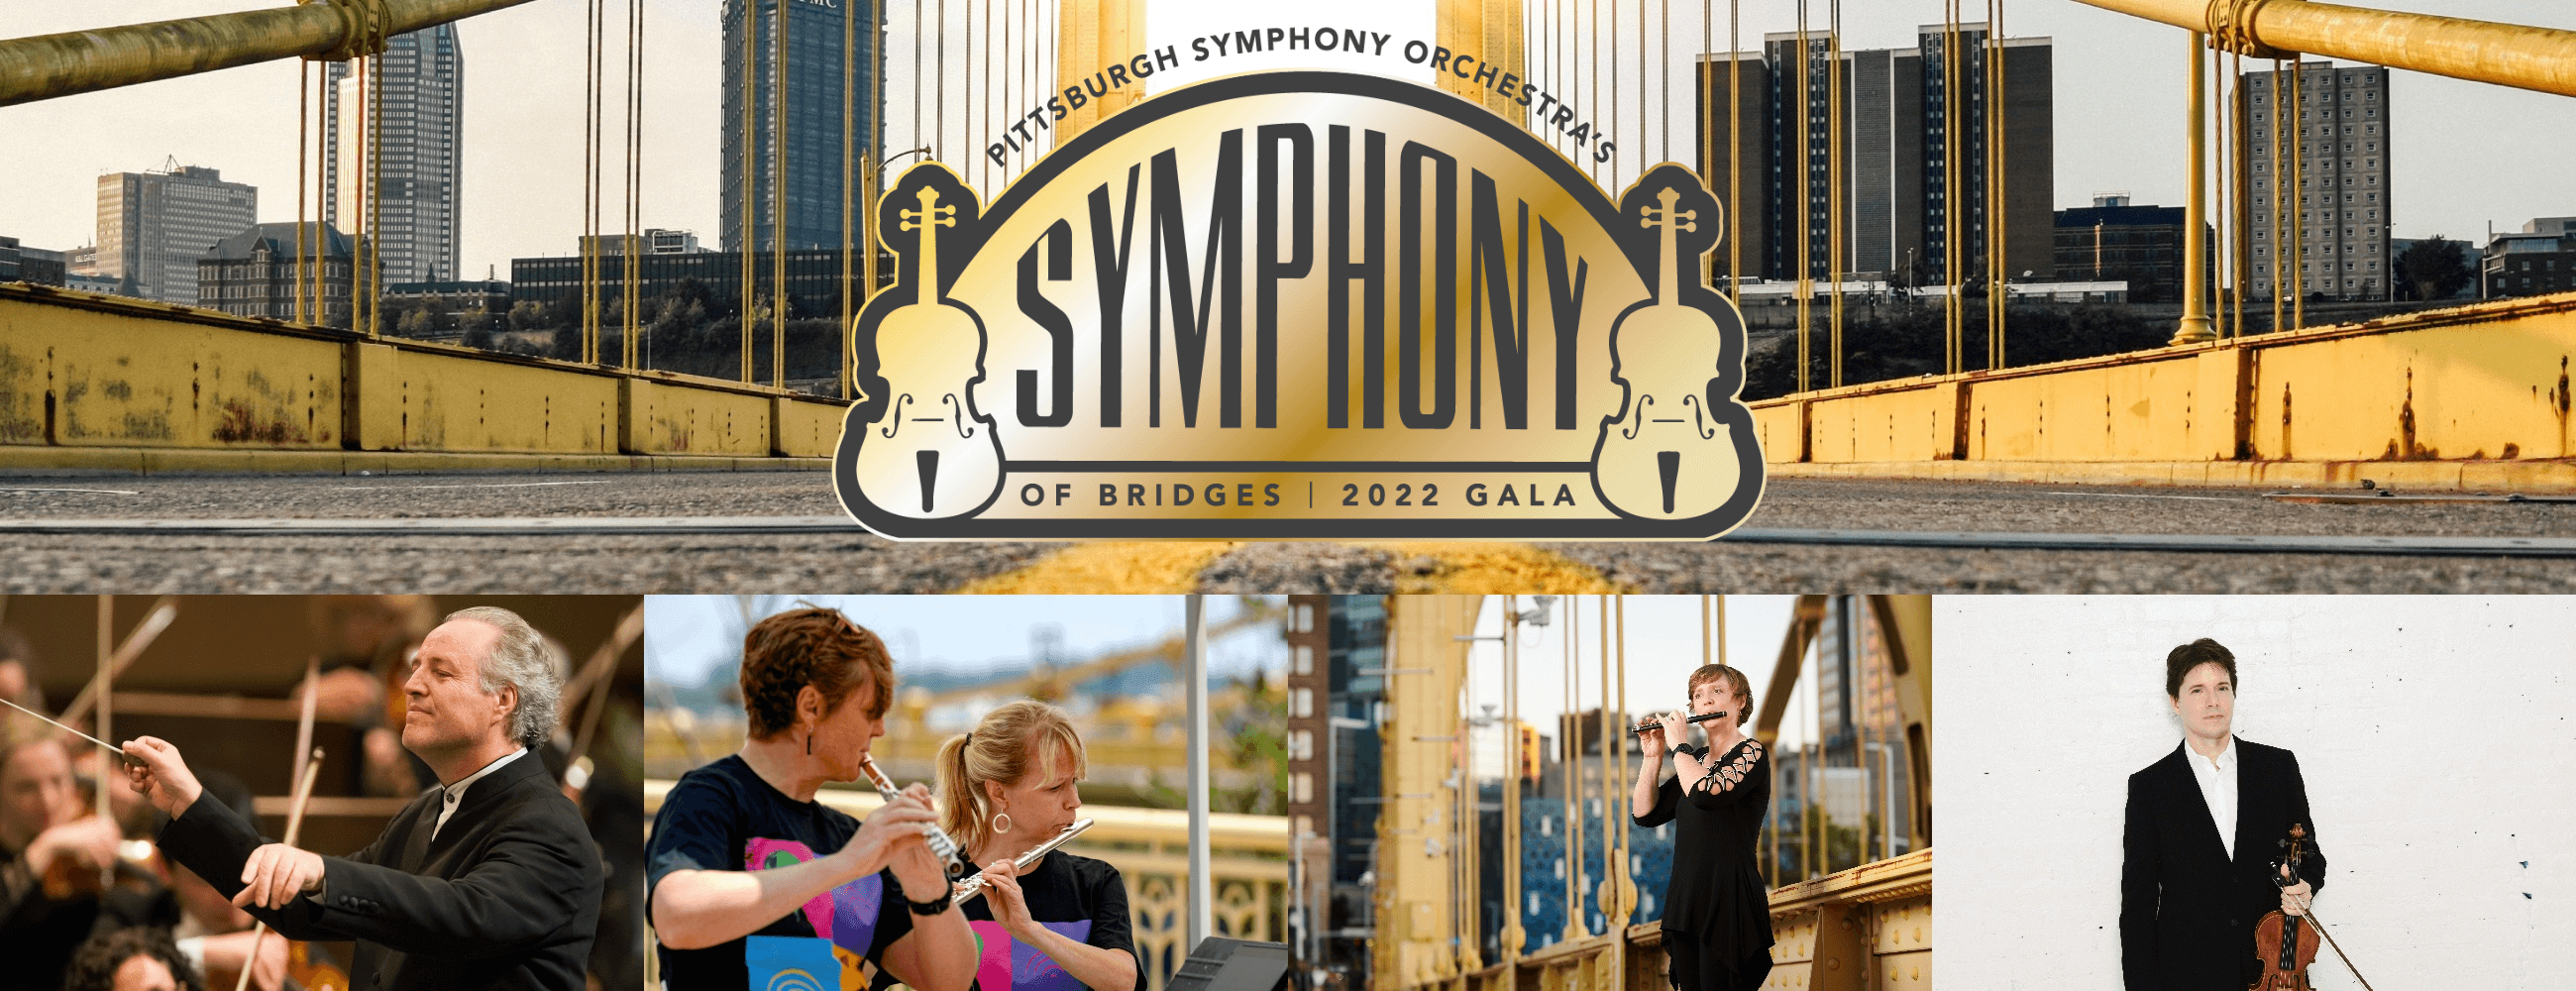 Symphony of Bridges Gala Concert Pittsburgh Official Ticket Source